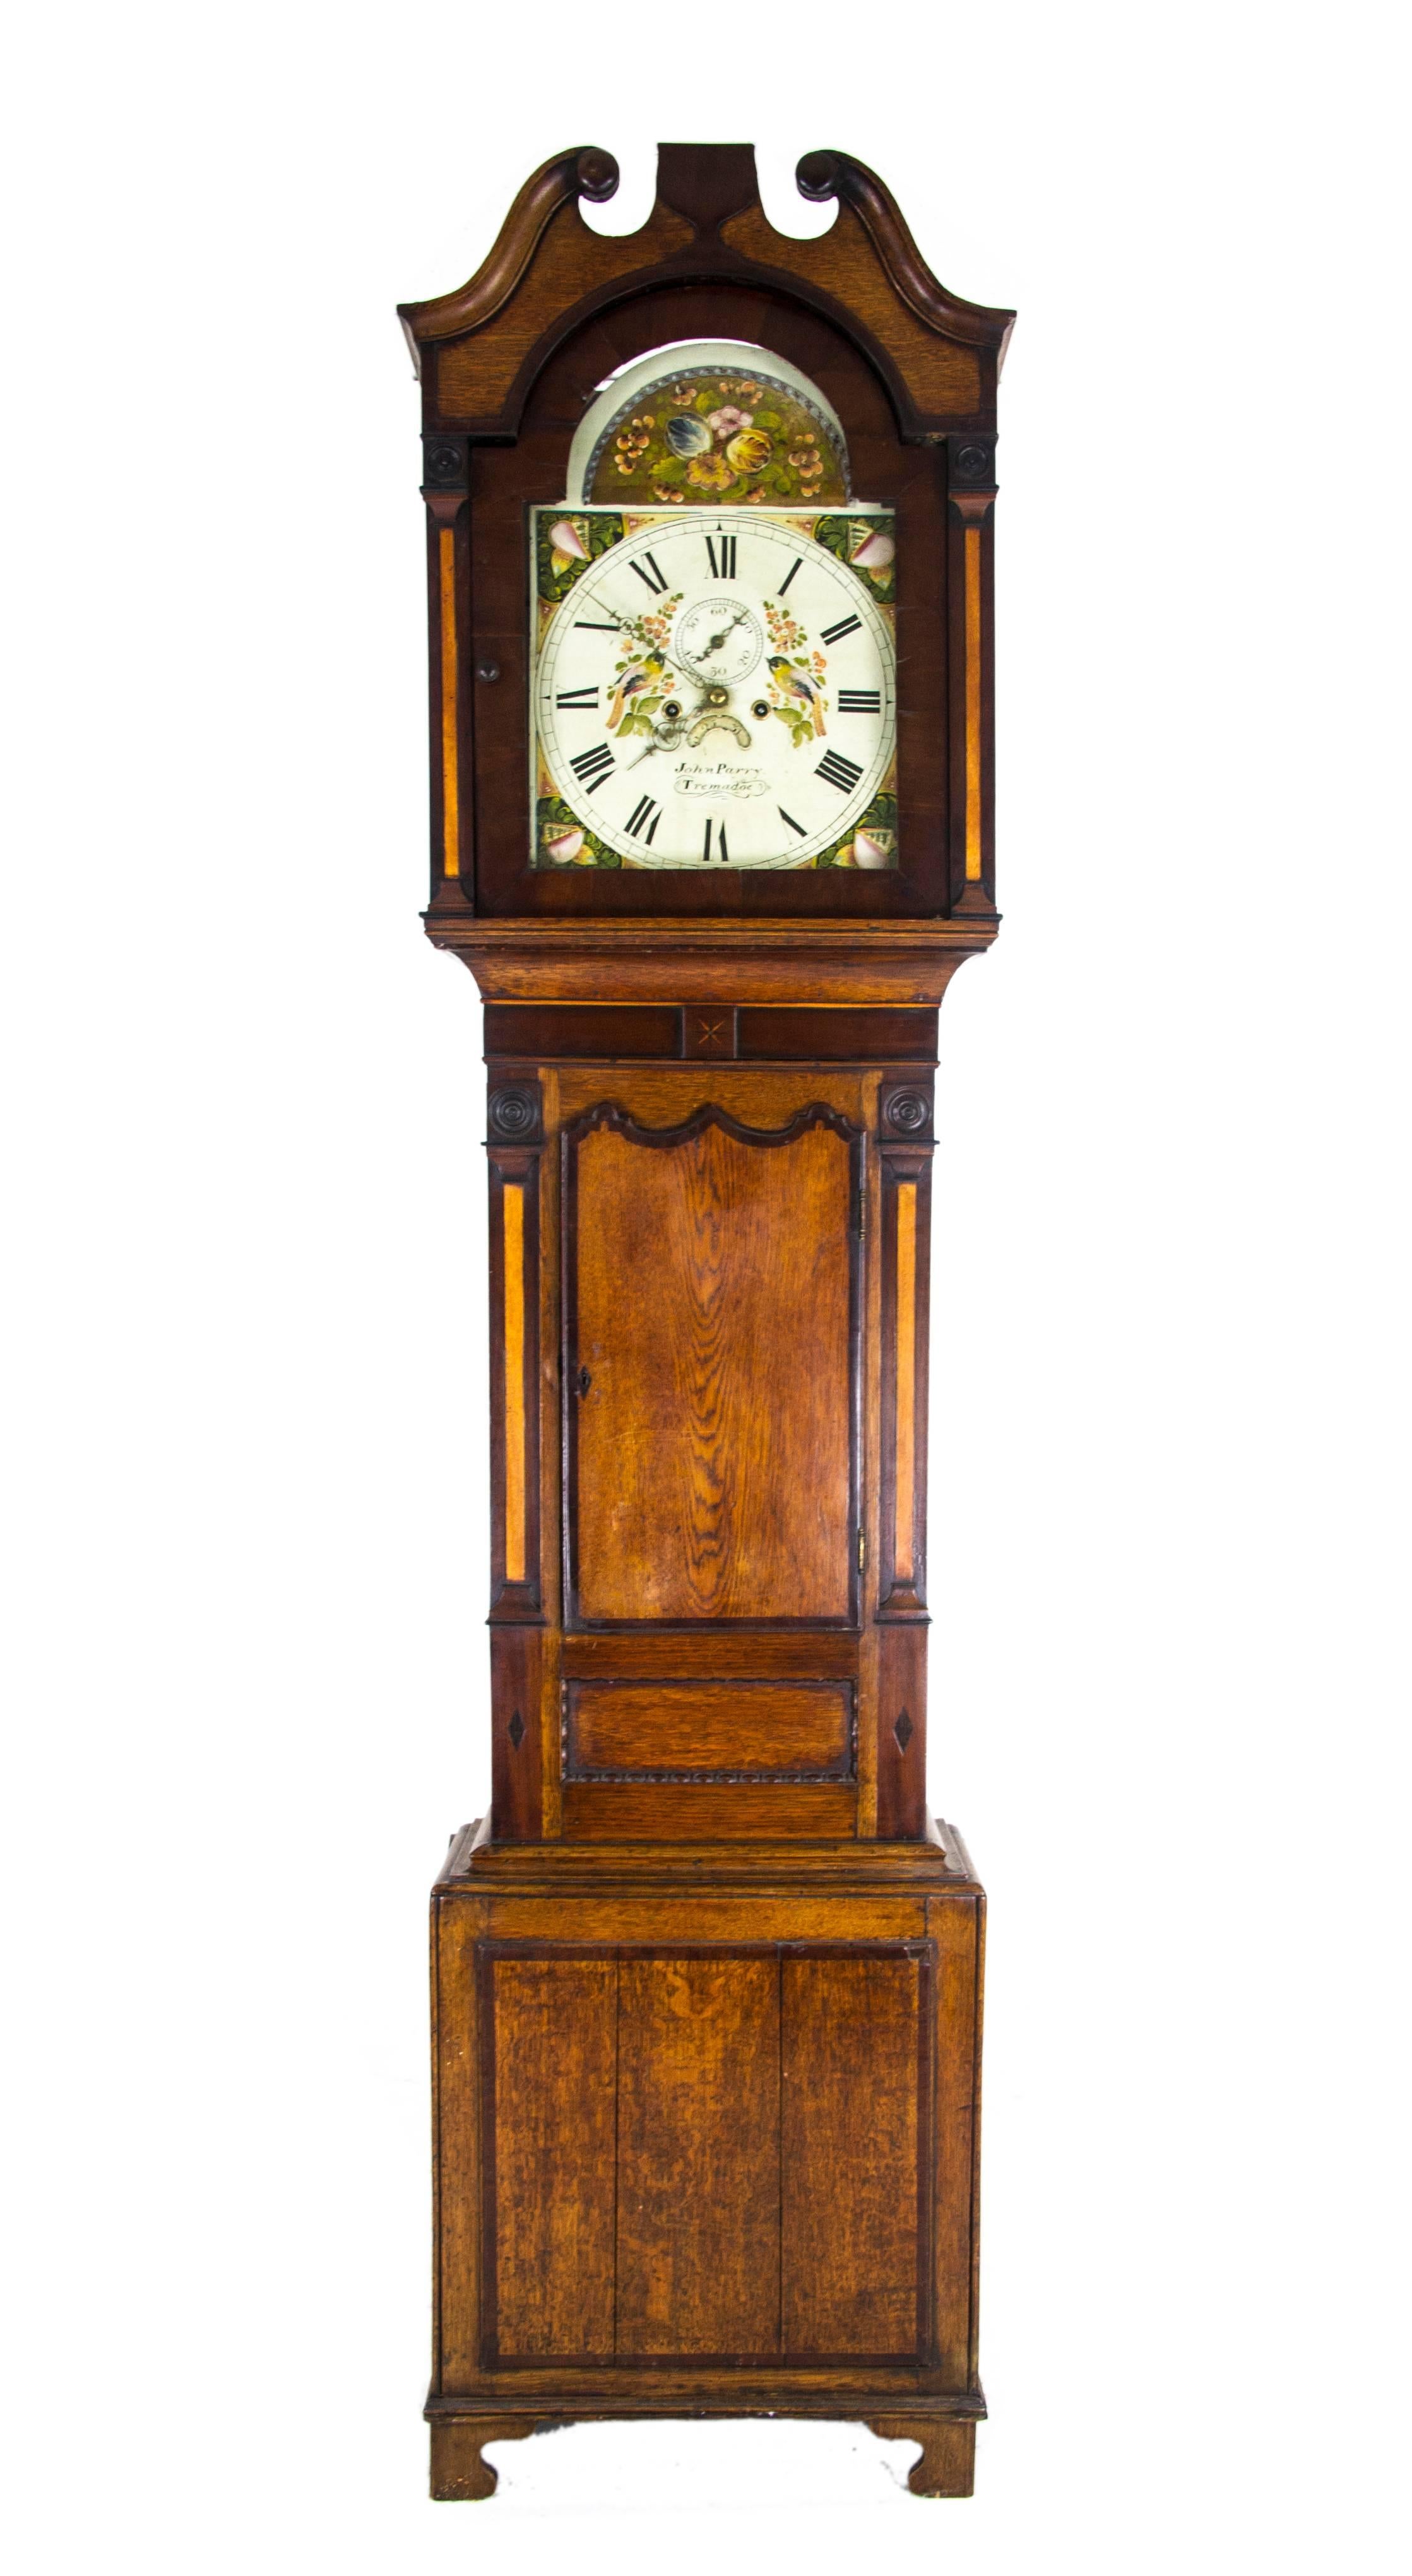 Antique Long Case Clock, Grandfather Clock, 8 Day Movement, John Parry Tremadoc, Wales 1820, B725

Wales, 1820
Oak and Mahogany Construction, inlaid Mahogany Crossbanding to the door and hood.
John Parry, of Tremadoc (Clockmaker)
Swan Neck